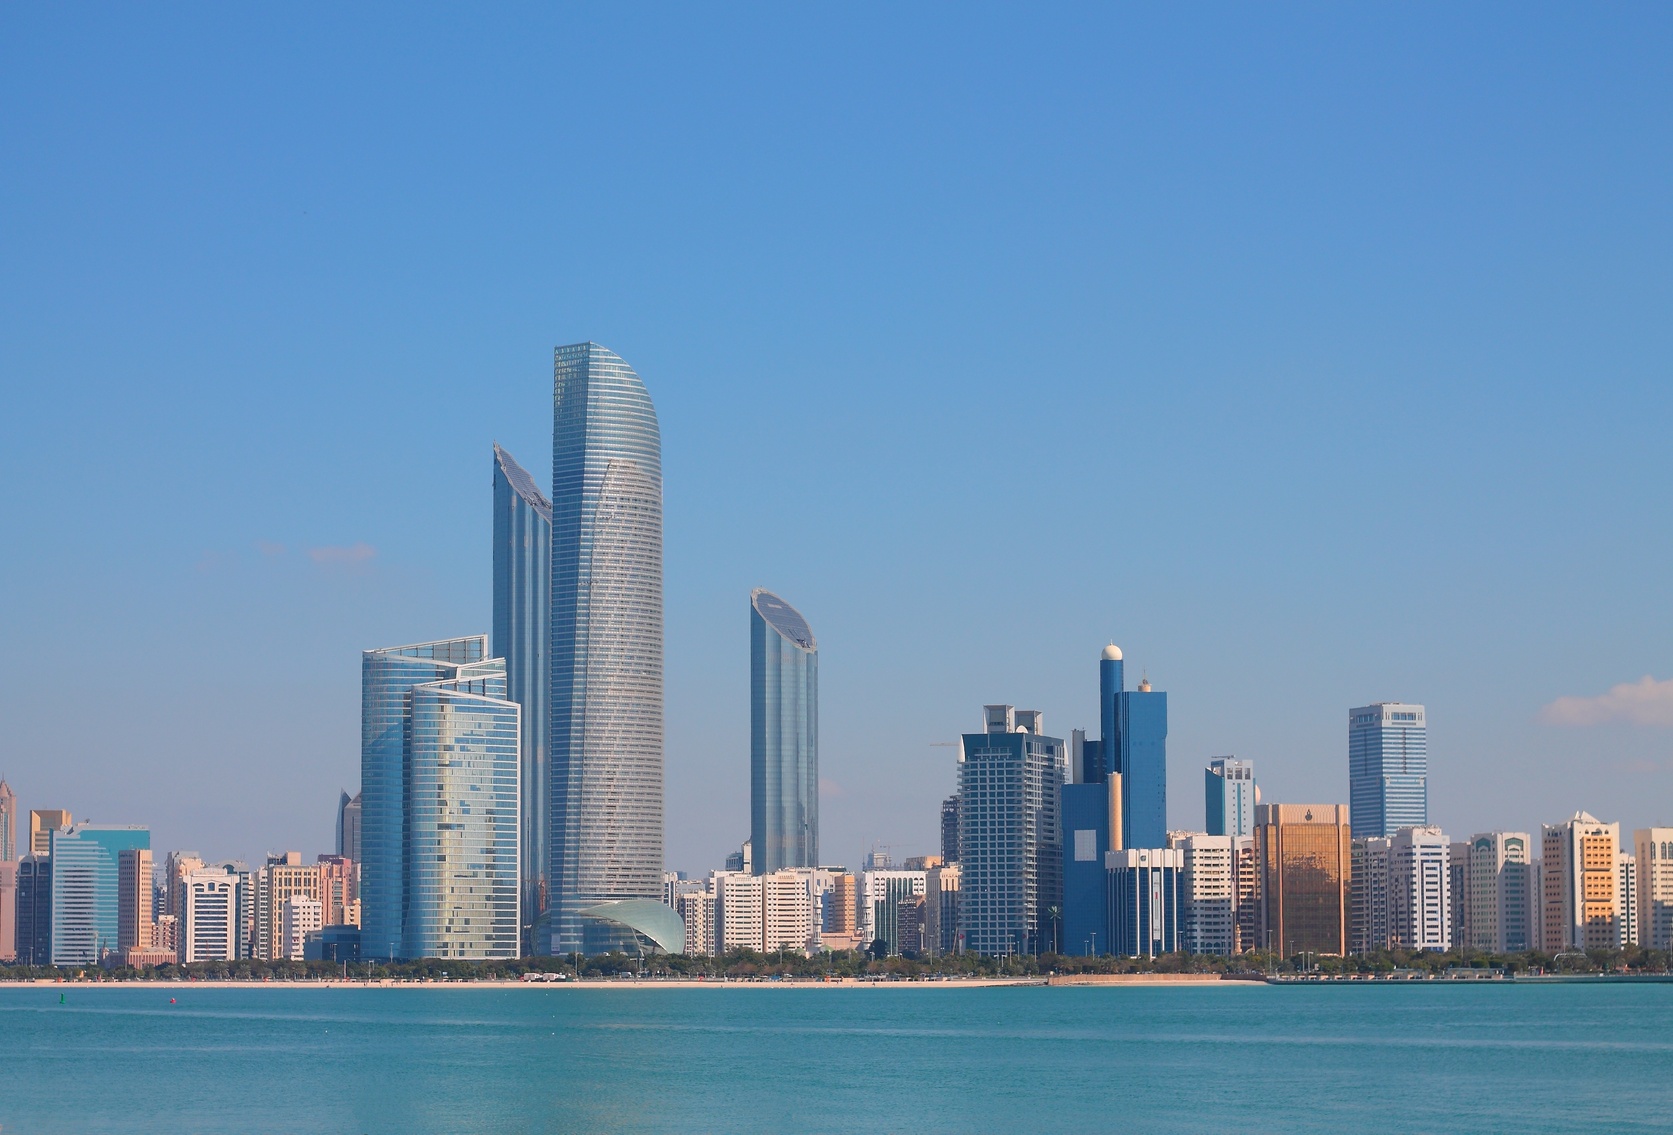 Abu Dhabi Welcomes 1.3 Million Hotel Guests For 3rd Quarter Of 2019 Boosting Room Revenues By 6%